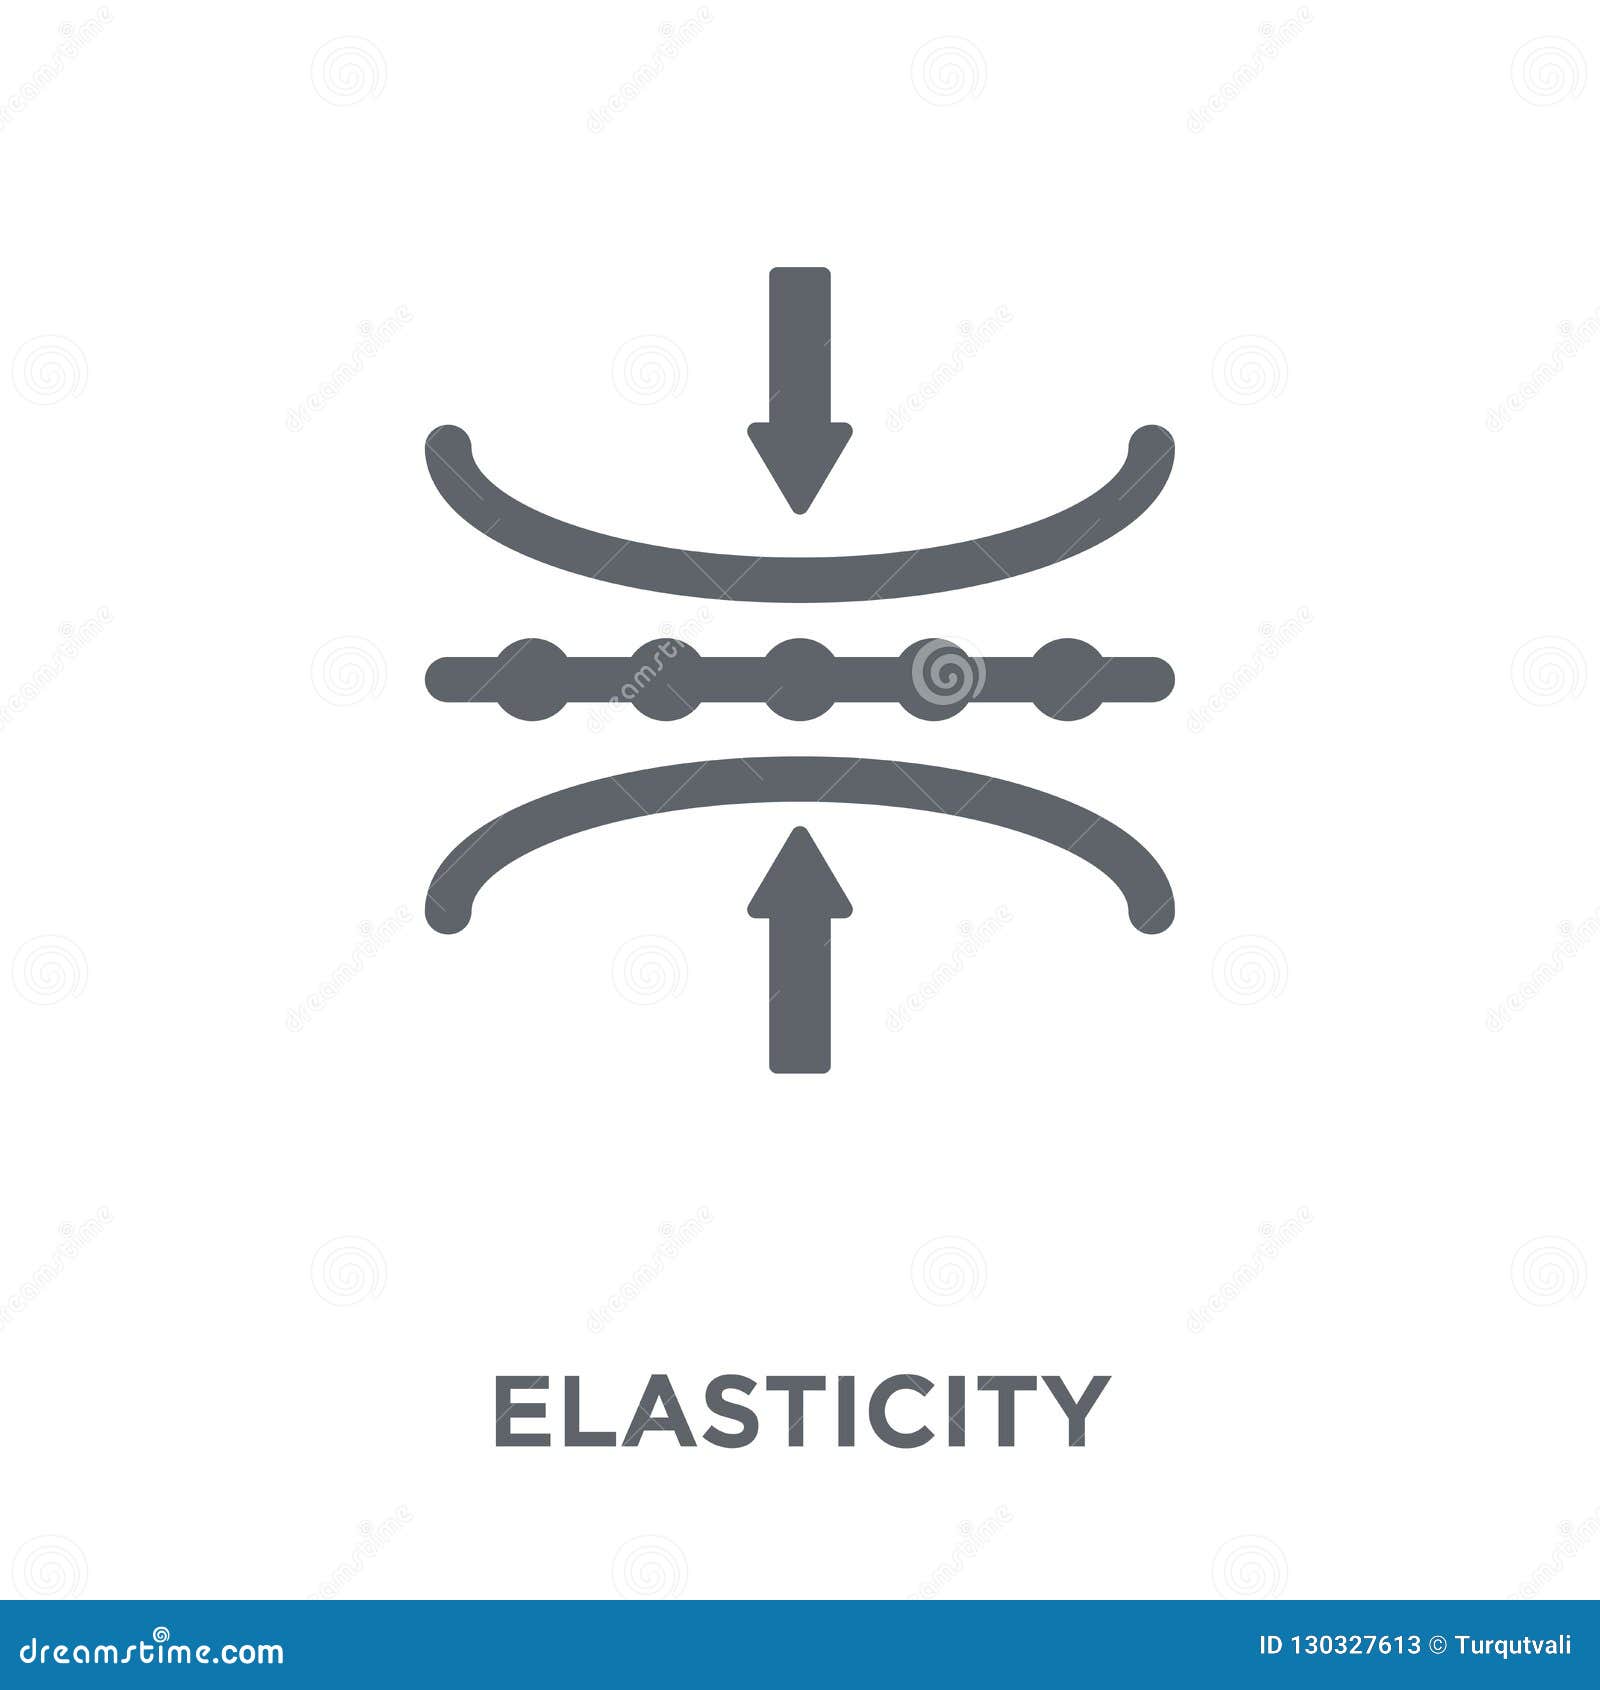 elasticity icon from elasticity collection.